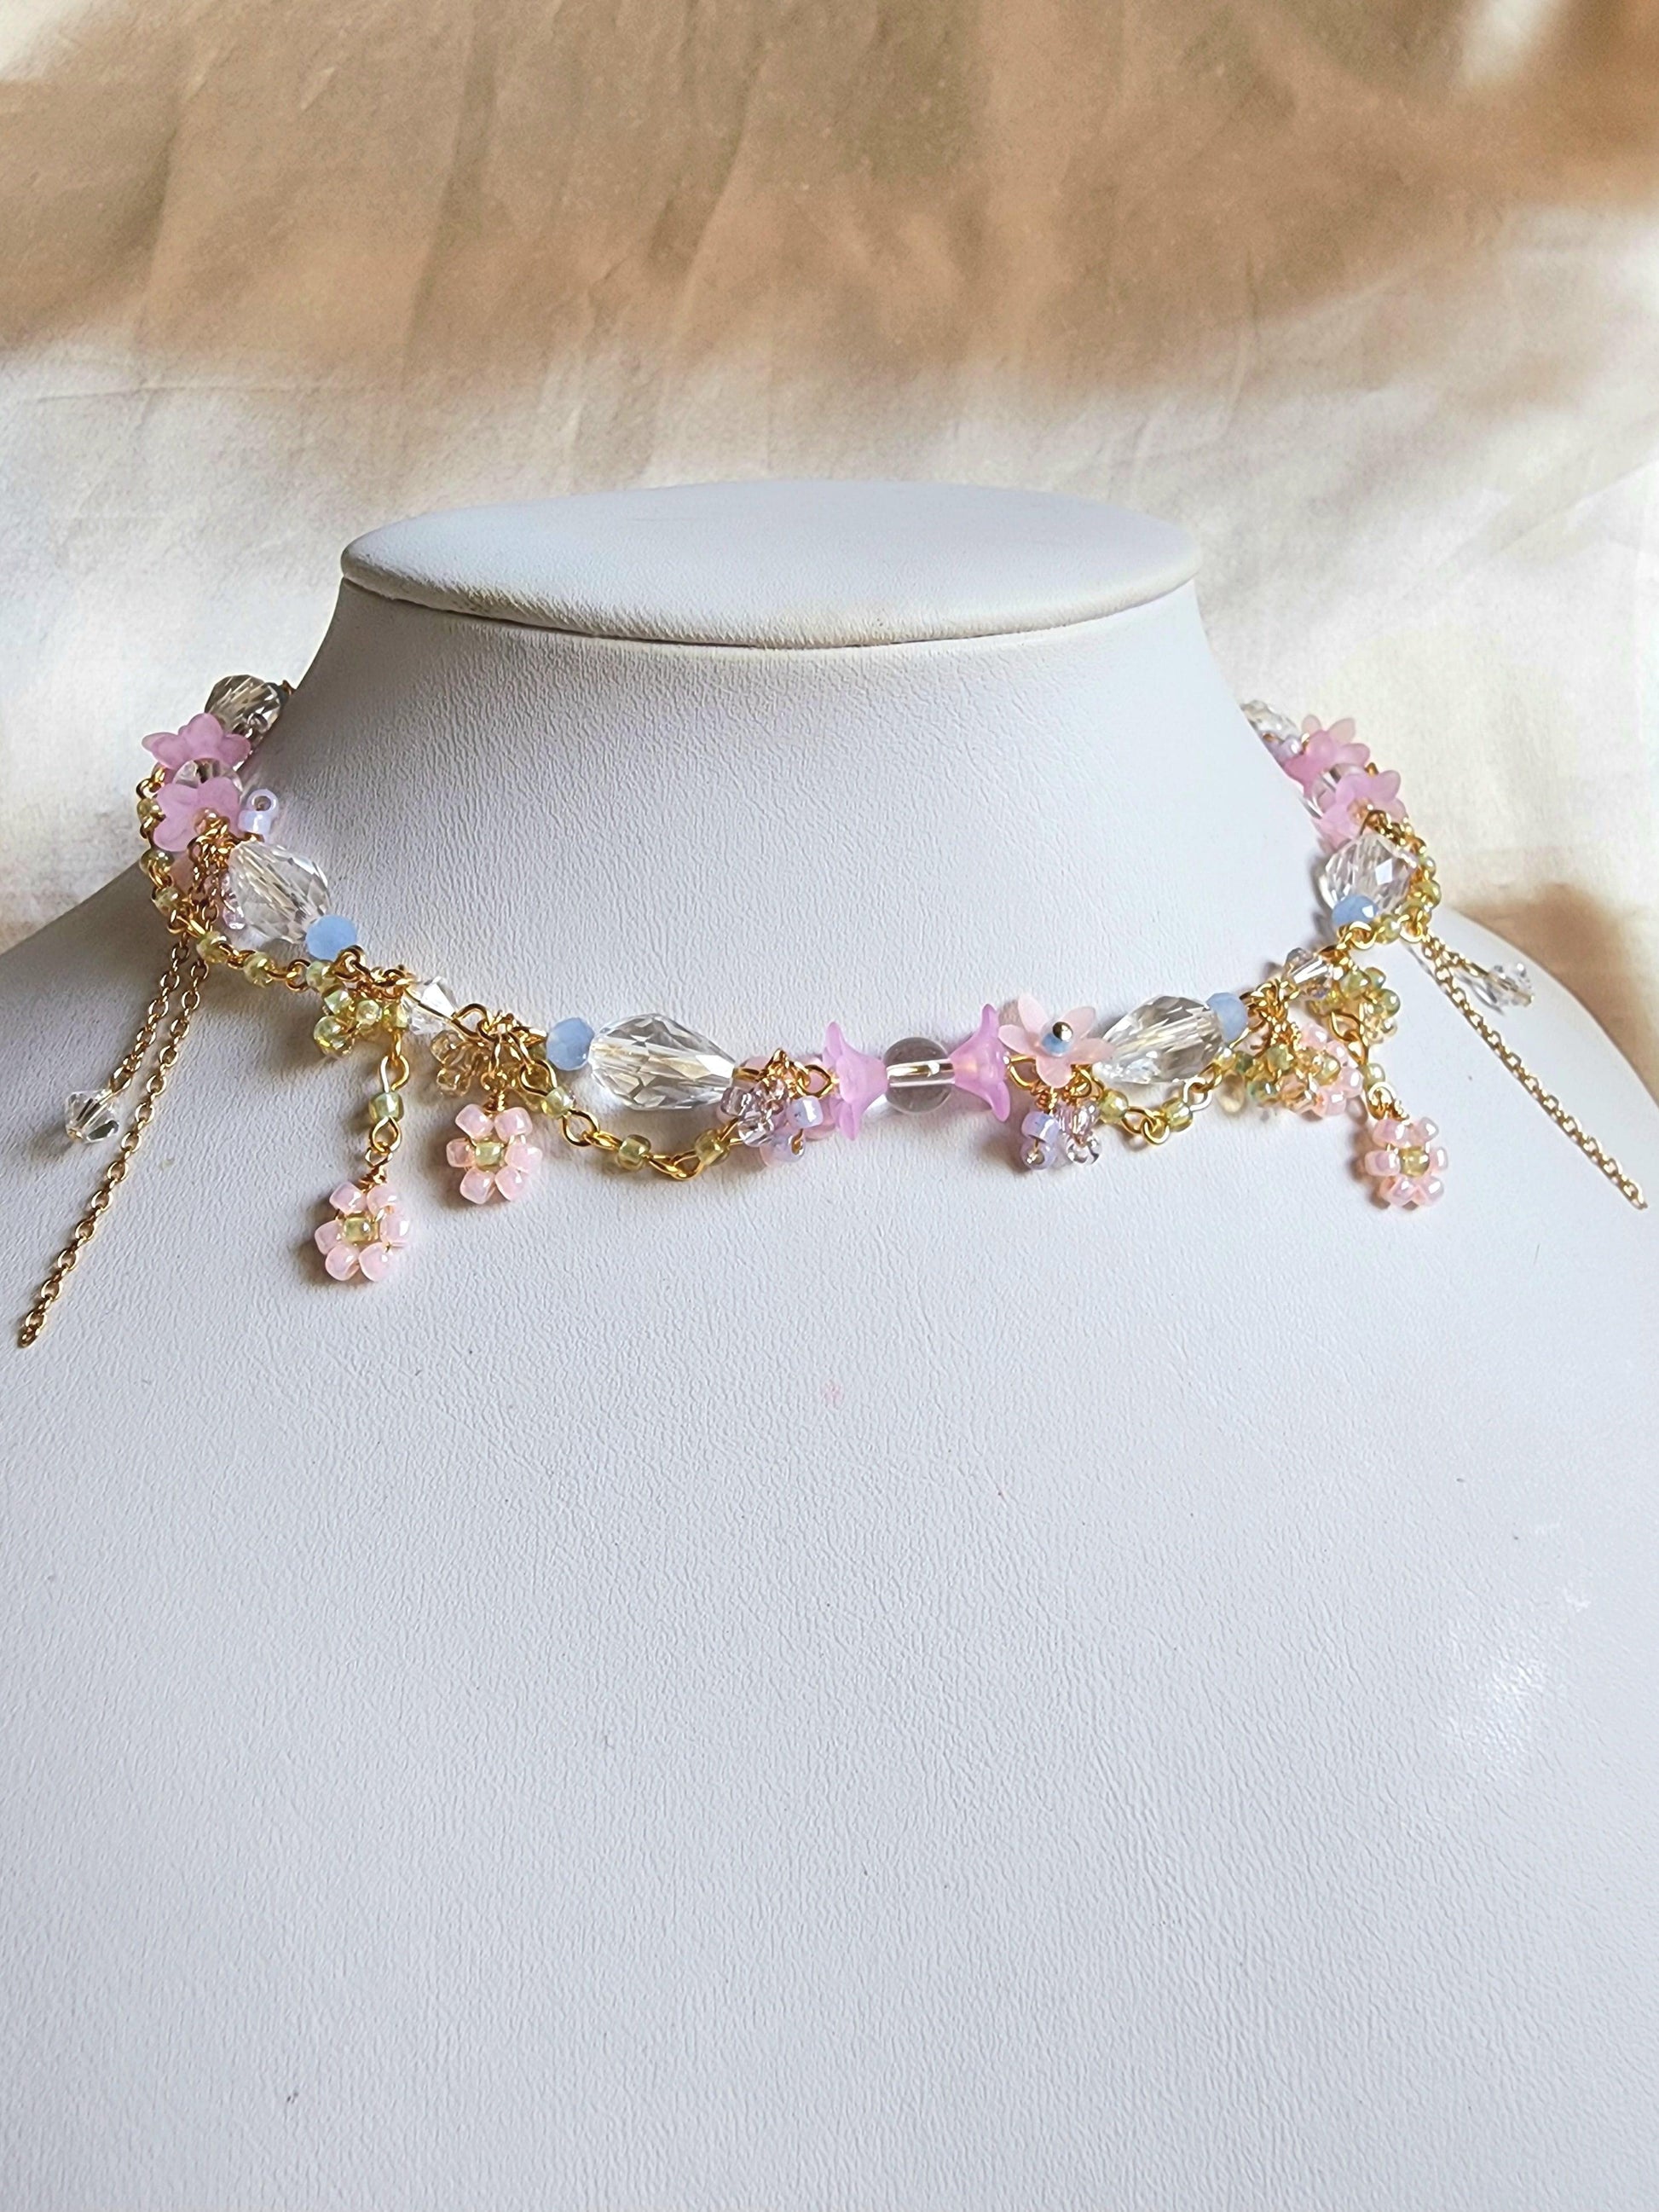 Floral Pools Necklace - By Cocoyu